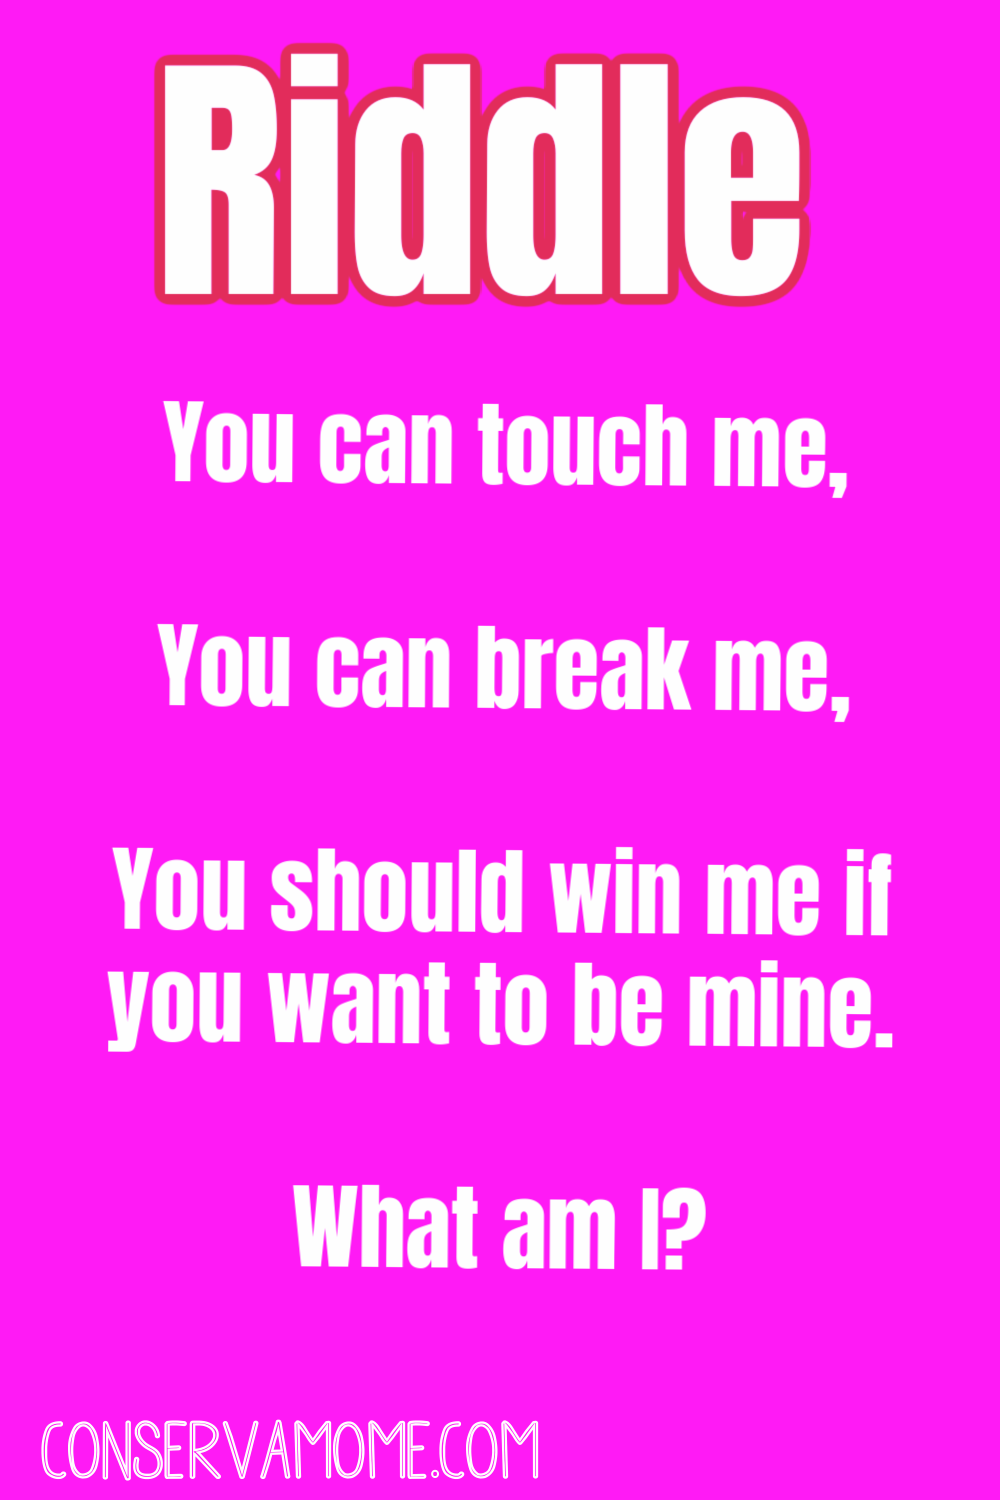 Valentine's Day Riddles & Jokes perfect for kids and adults!